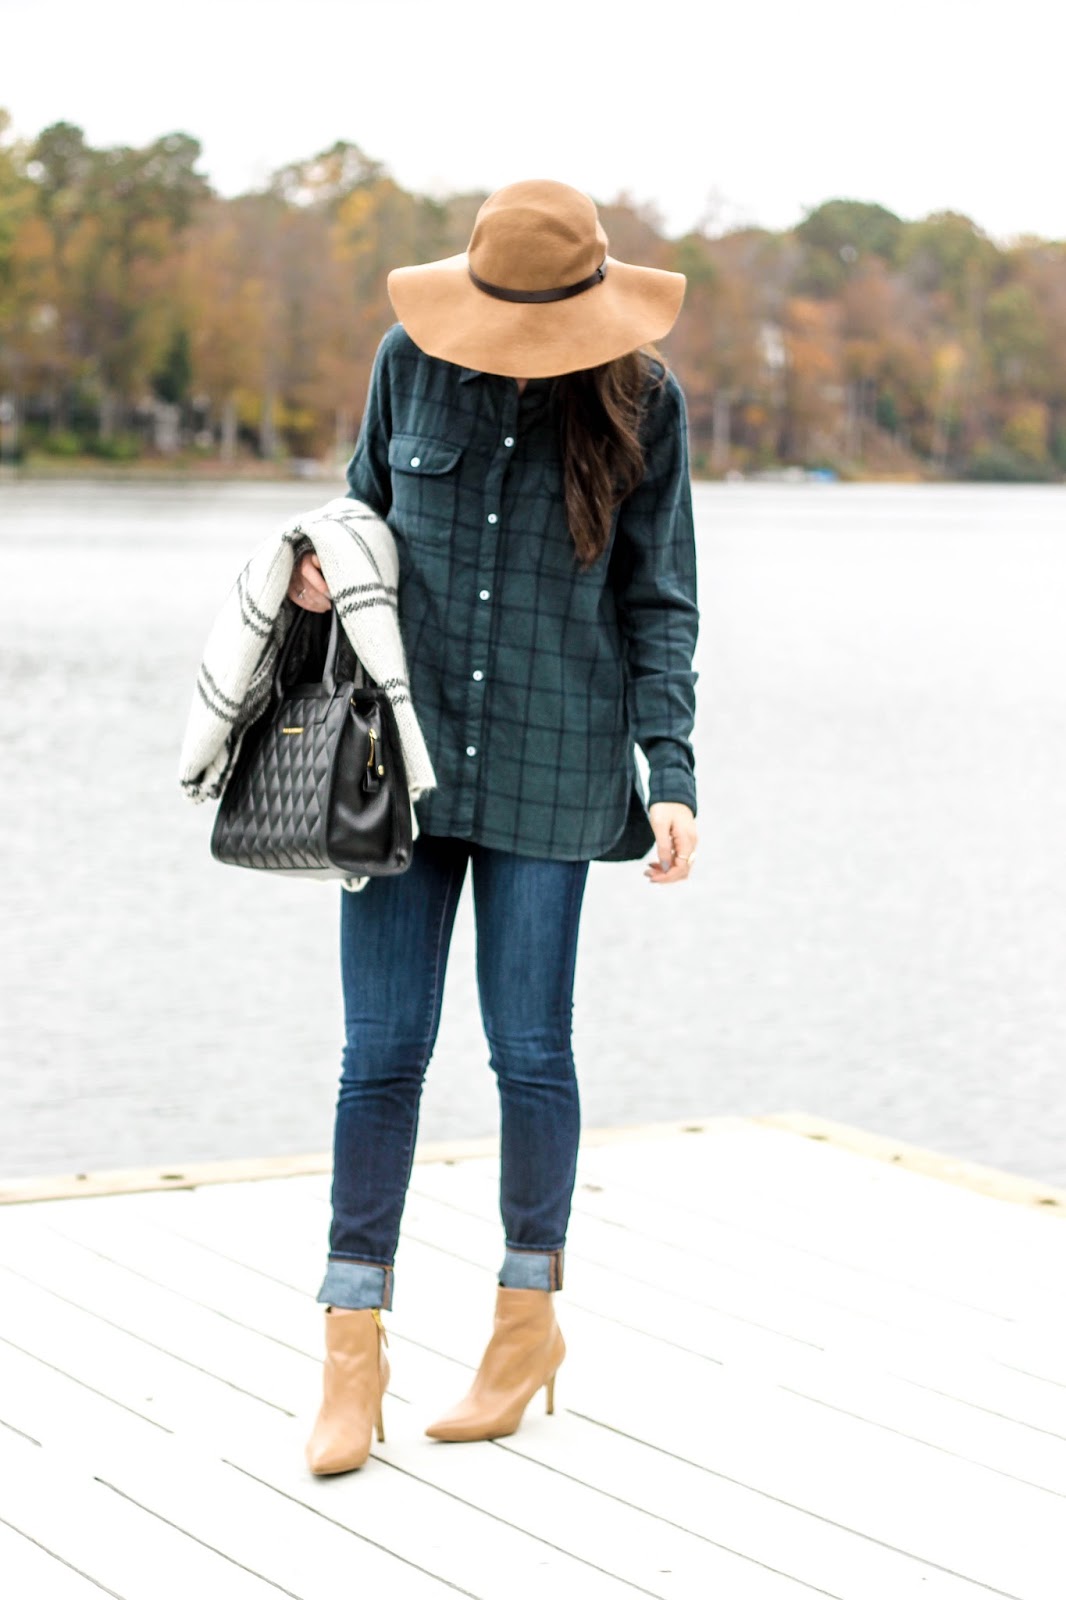 Plaid Shirt, Plaid Cape, Floppy Camel Hat, Fall Fashion, Fall Trends, Vera Bradley Quilted Natalie Satchel, Perfect Black Bag, Fall outfit, camel pointy toe booties, sam edelman booties, fall fashion, pretty in the pines, fashion blog, fashion blogger, lyon and post, sundry flannel, flannel shirts for women, thanksgiving outfit ideas, cute thanksgiving outfit